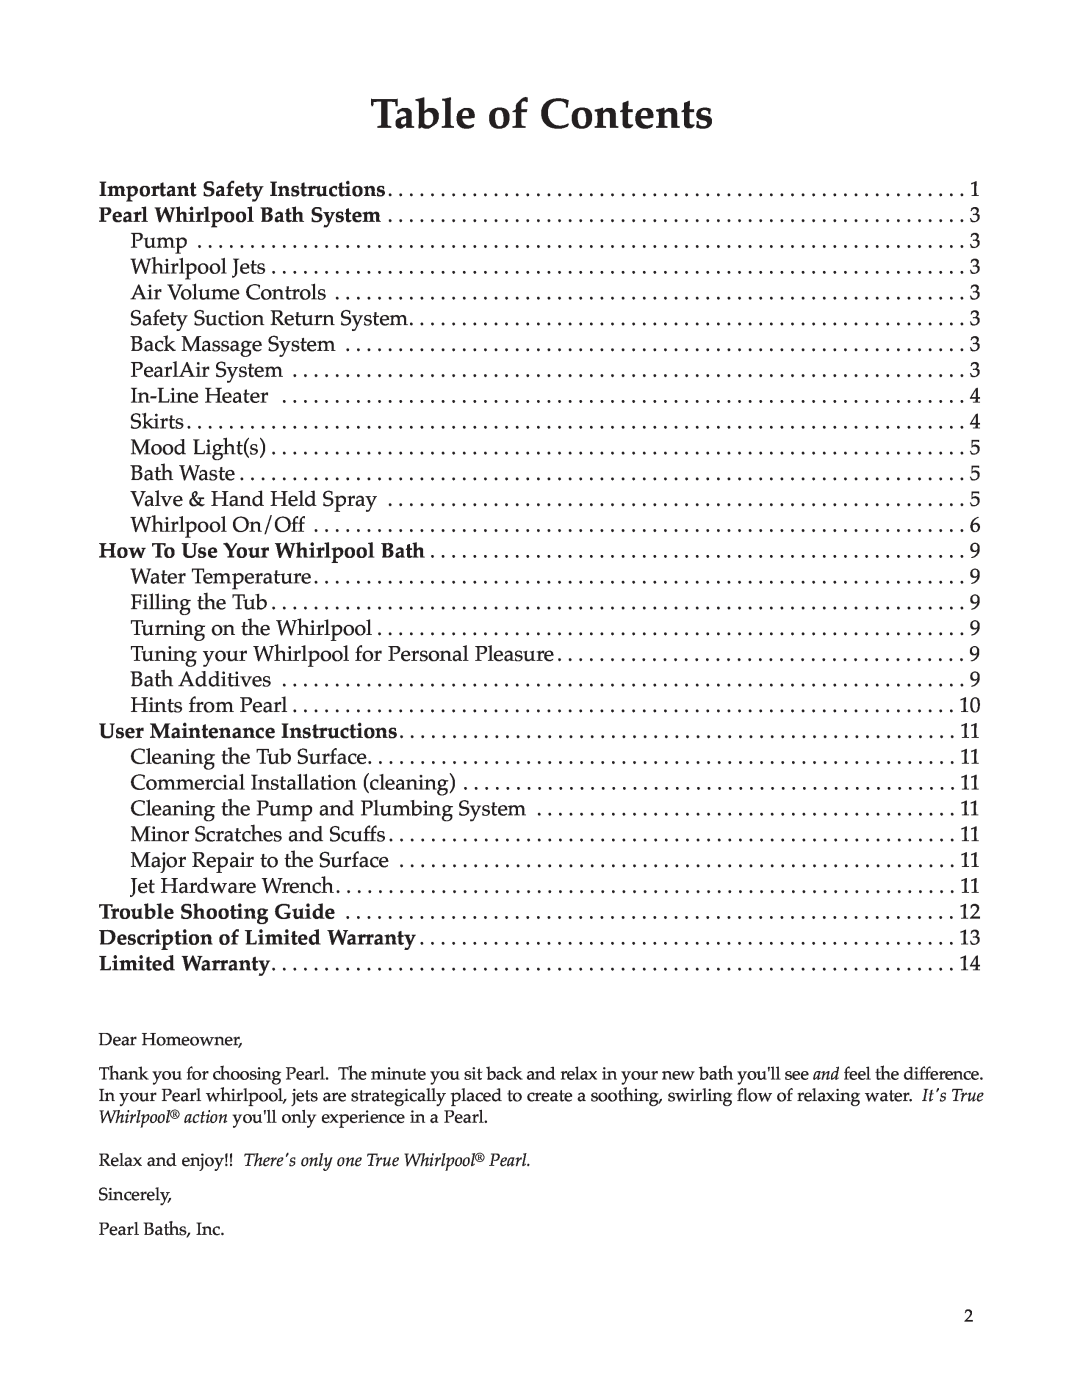 Whirlpool Hot Tub owner manual Table of Contents, Dear Homeowner, Sincerely Pearl Baths, Inc 